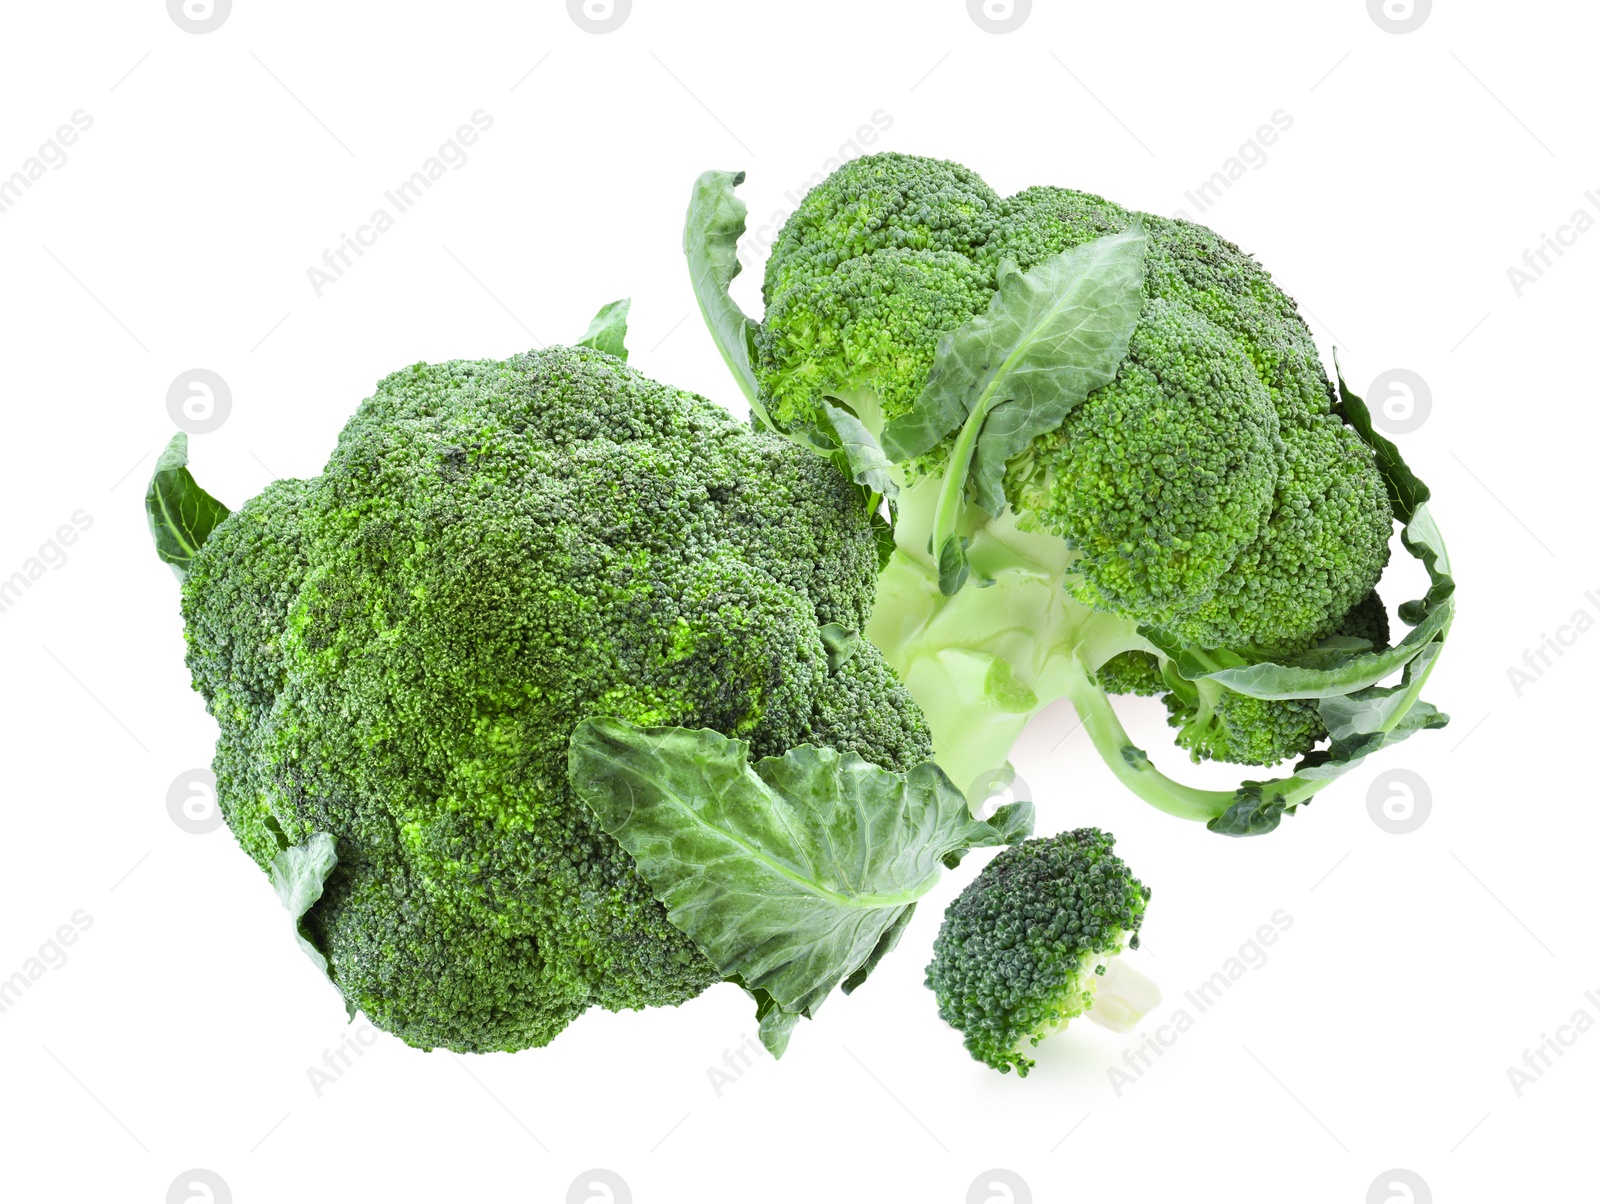 Image of Fresh green broccoli on white background. Edible plant